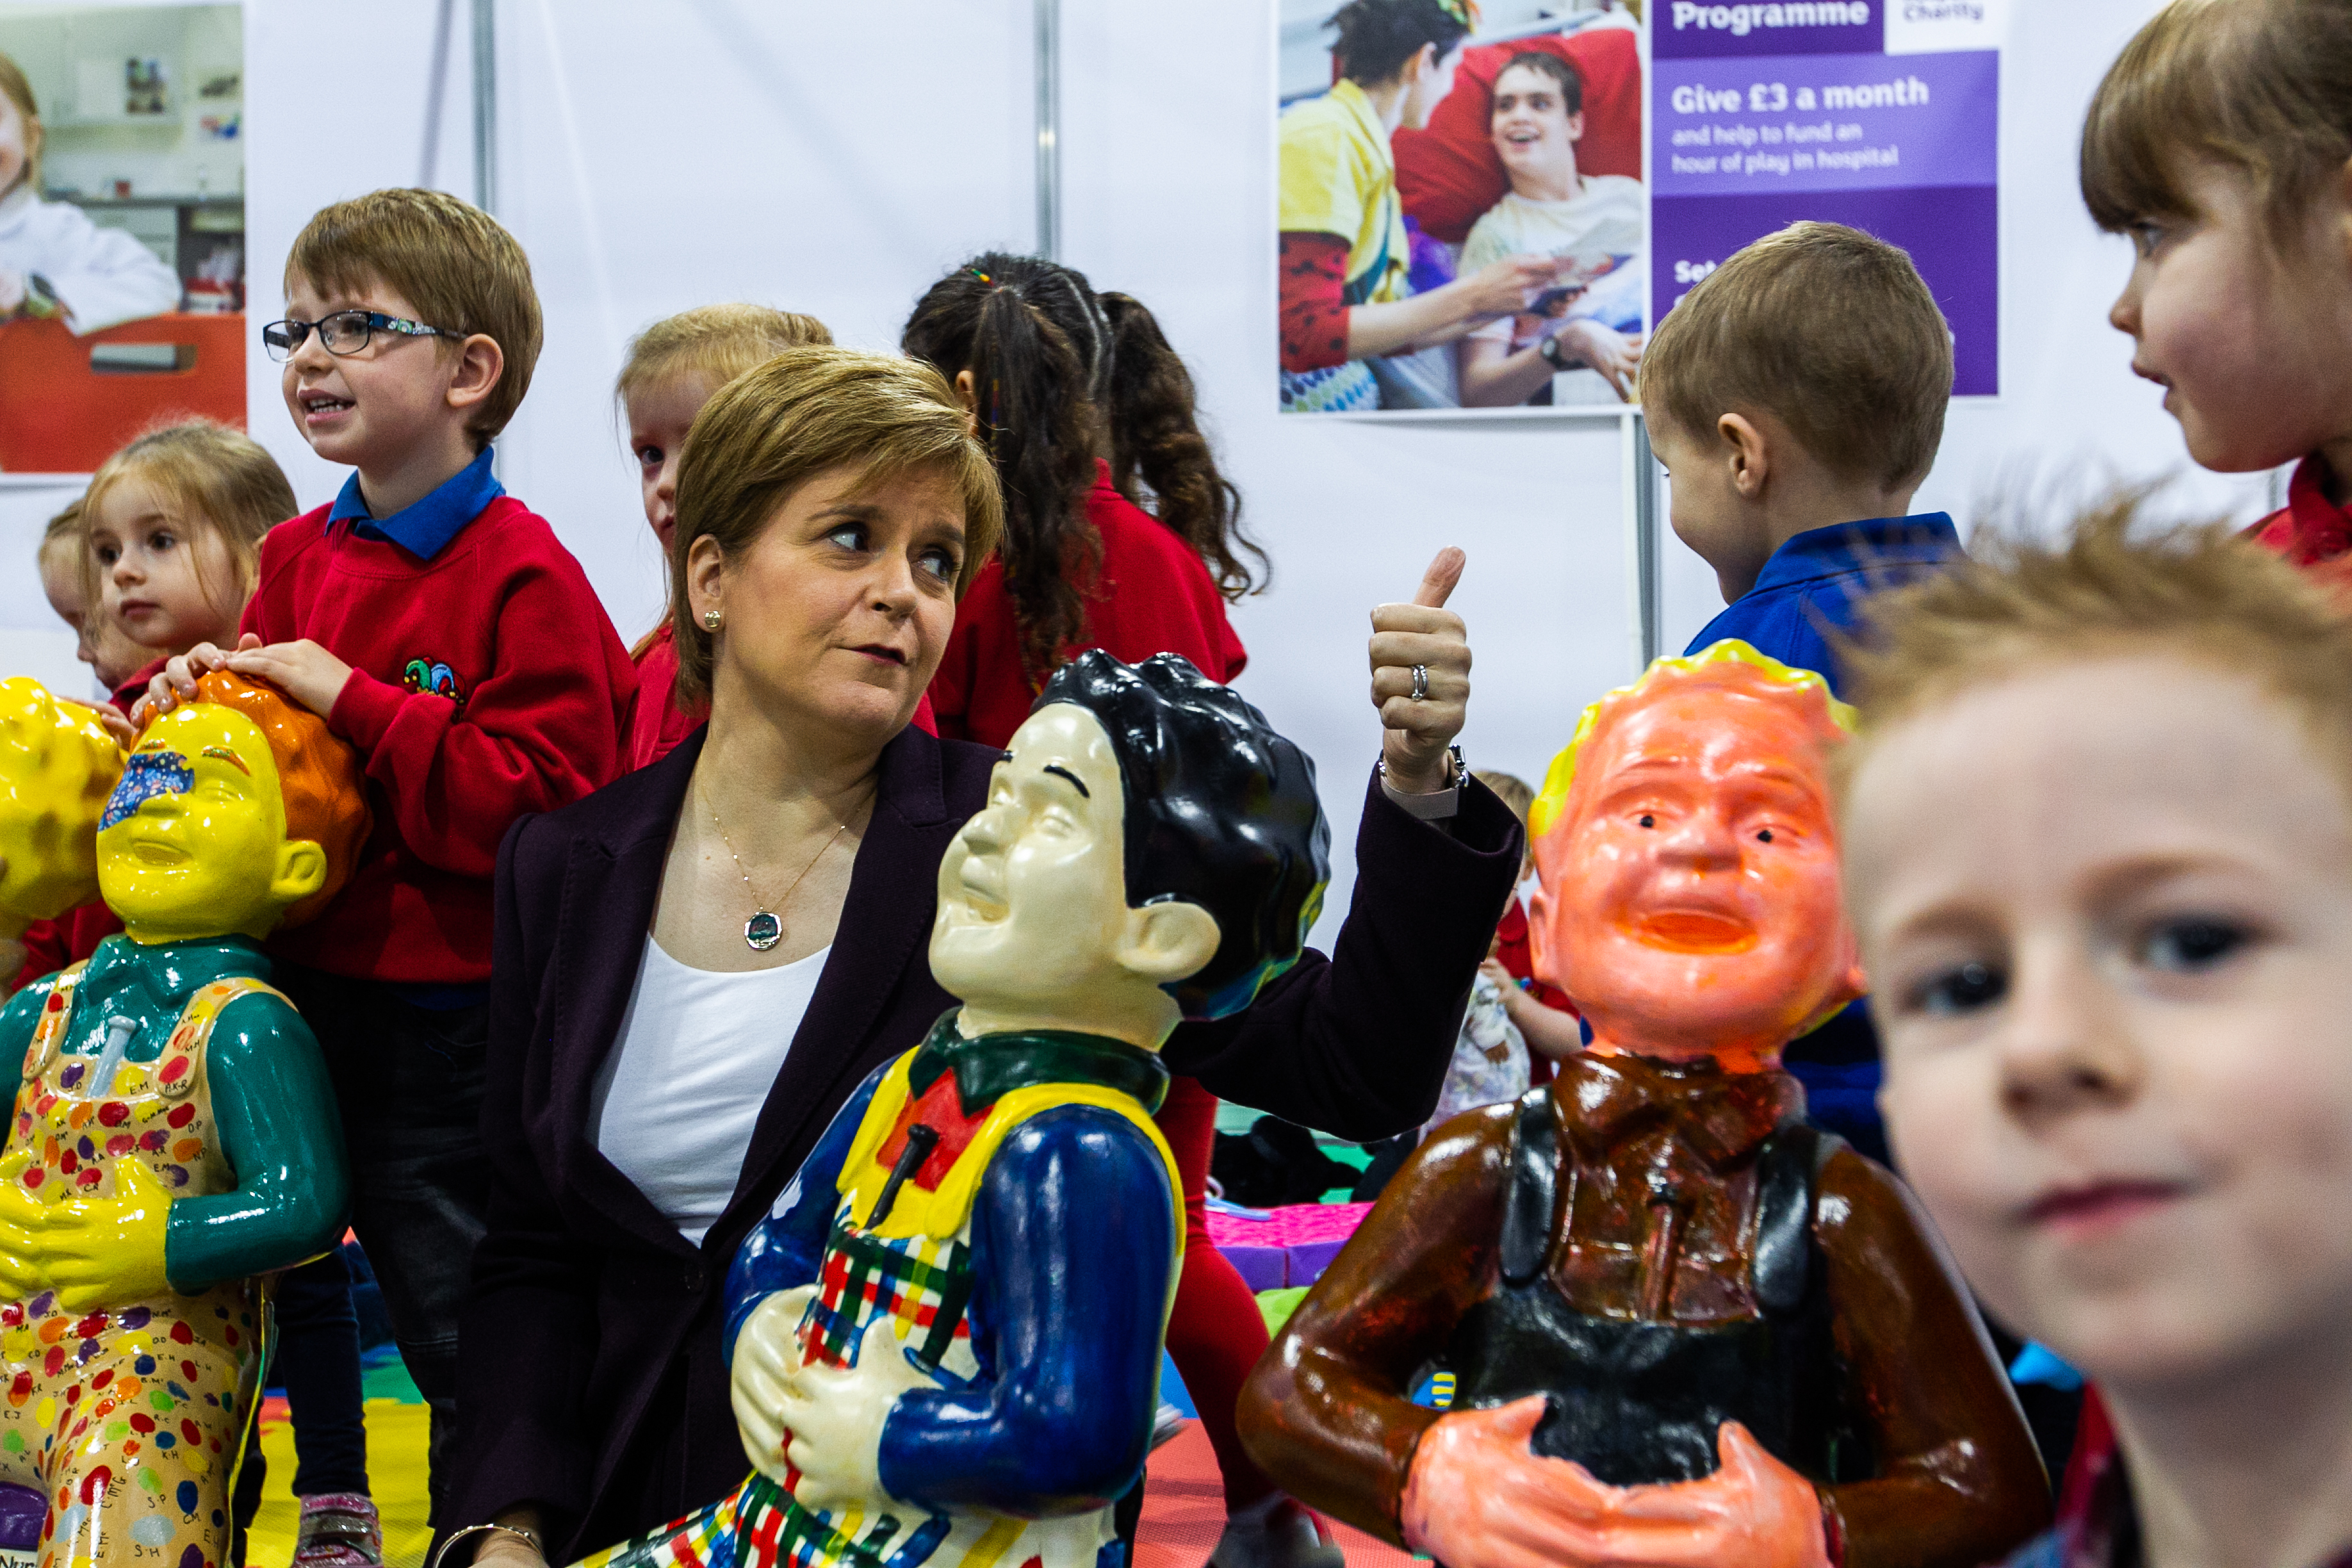 First Minister Nicola Sturgeon meeting local nursery children at the SEC in Glasgow for the opening of the Oor Wullie Bucket Trail event.